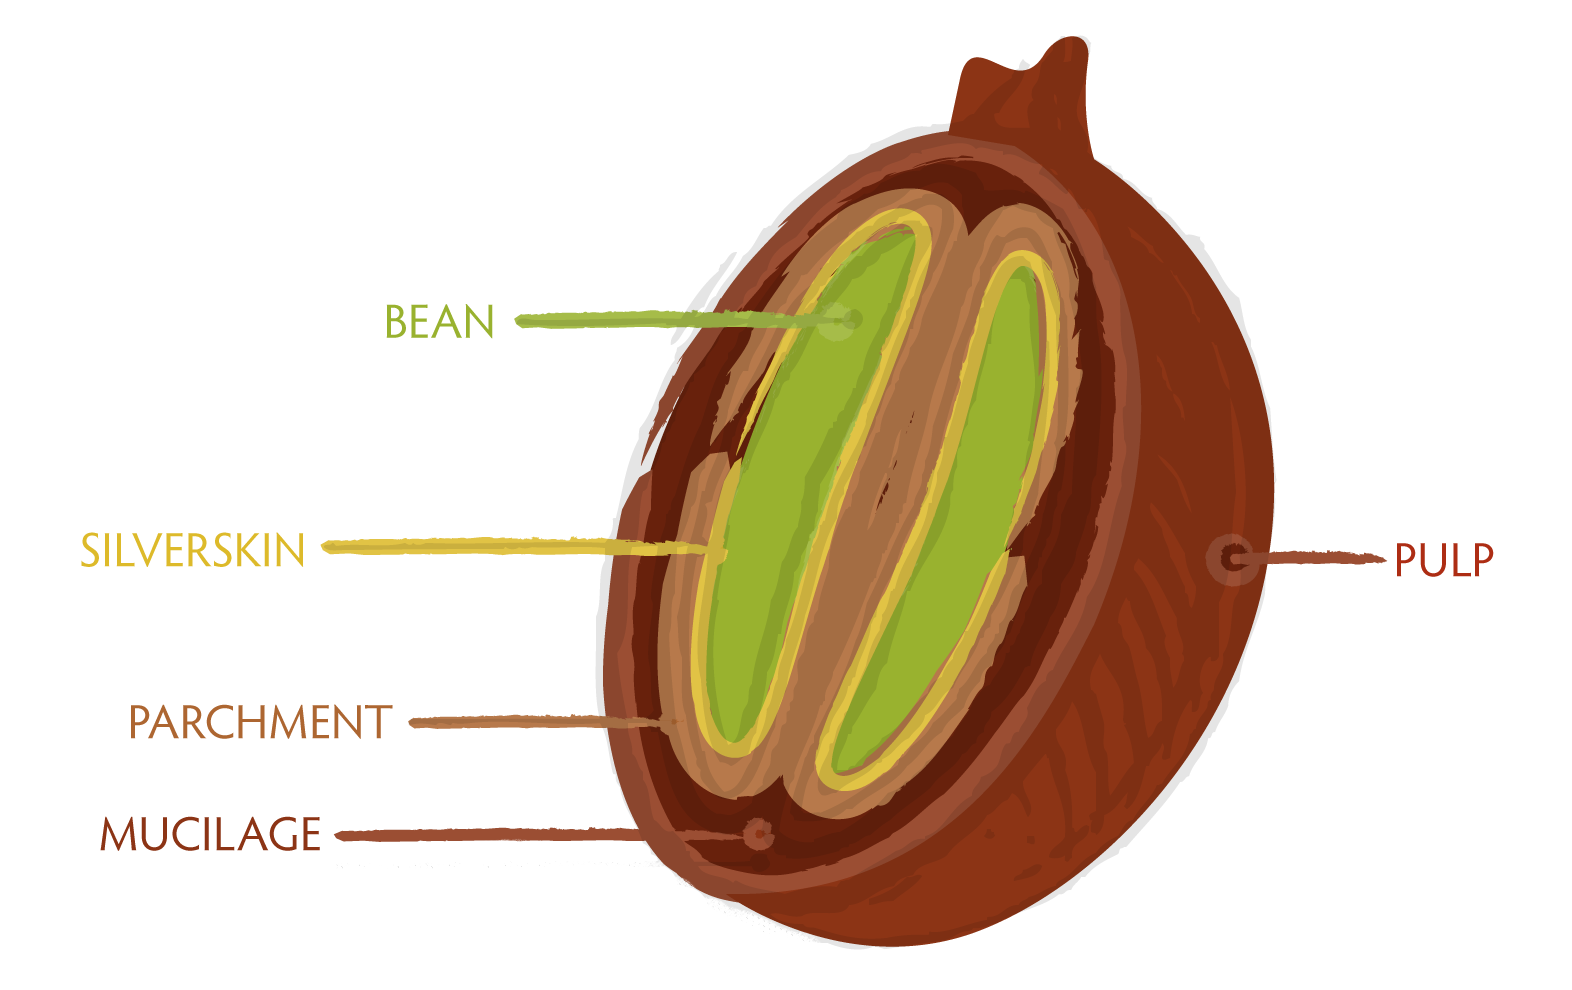 Image : Seattle Coffee Works - Anatomy of a Coffee Cherry